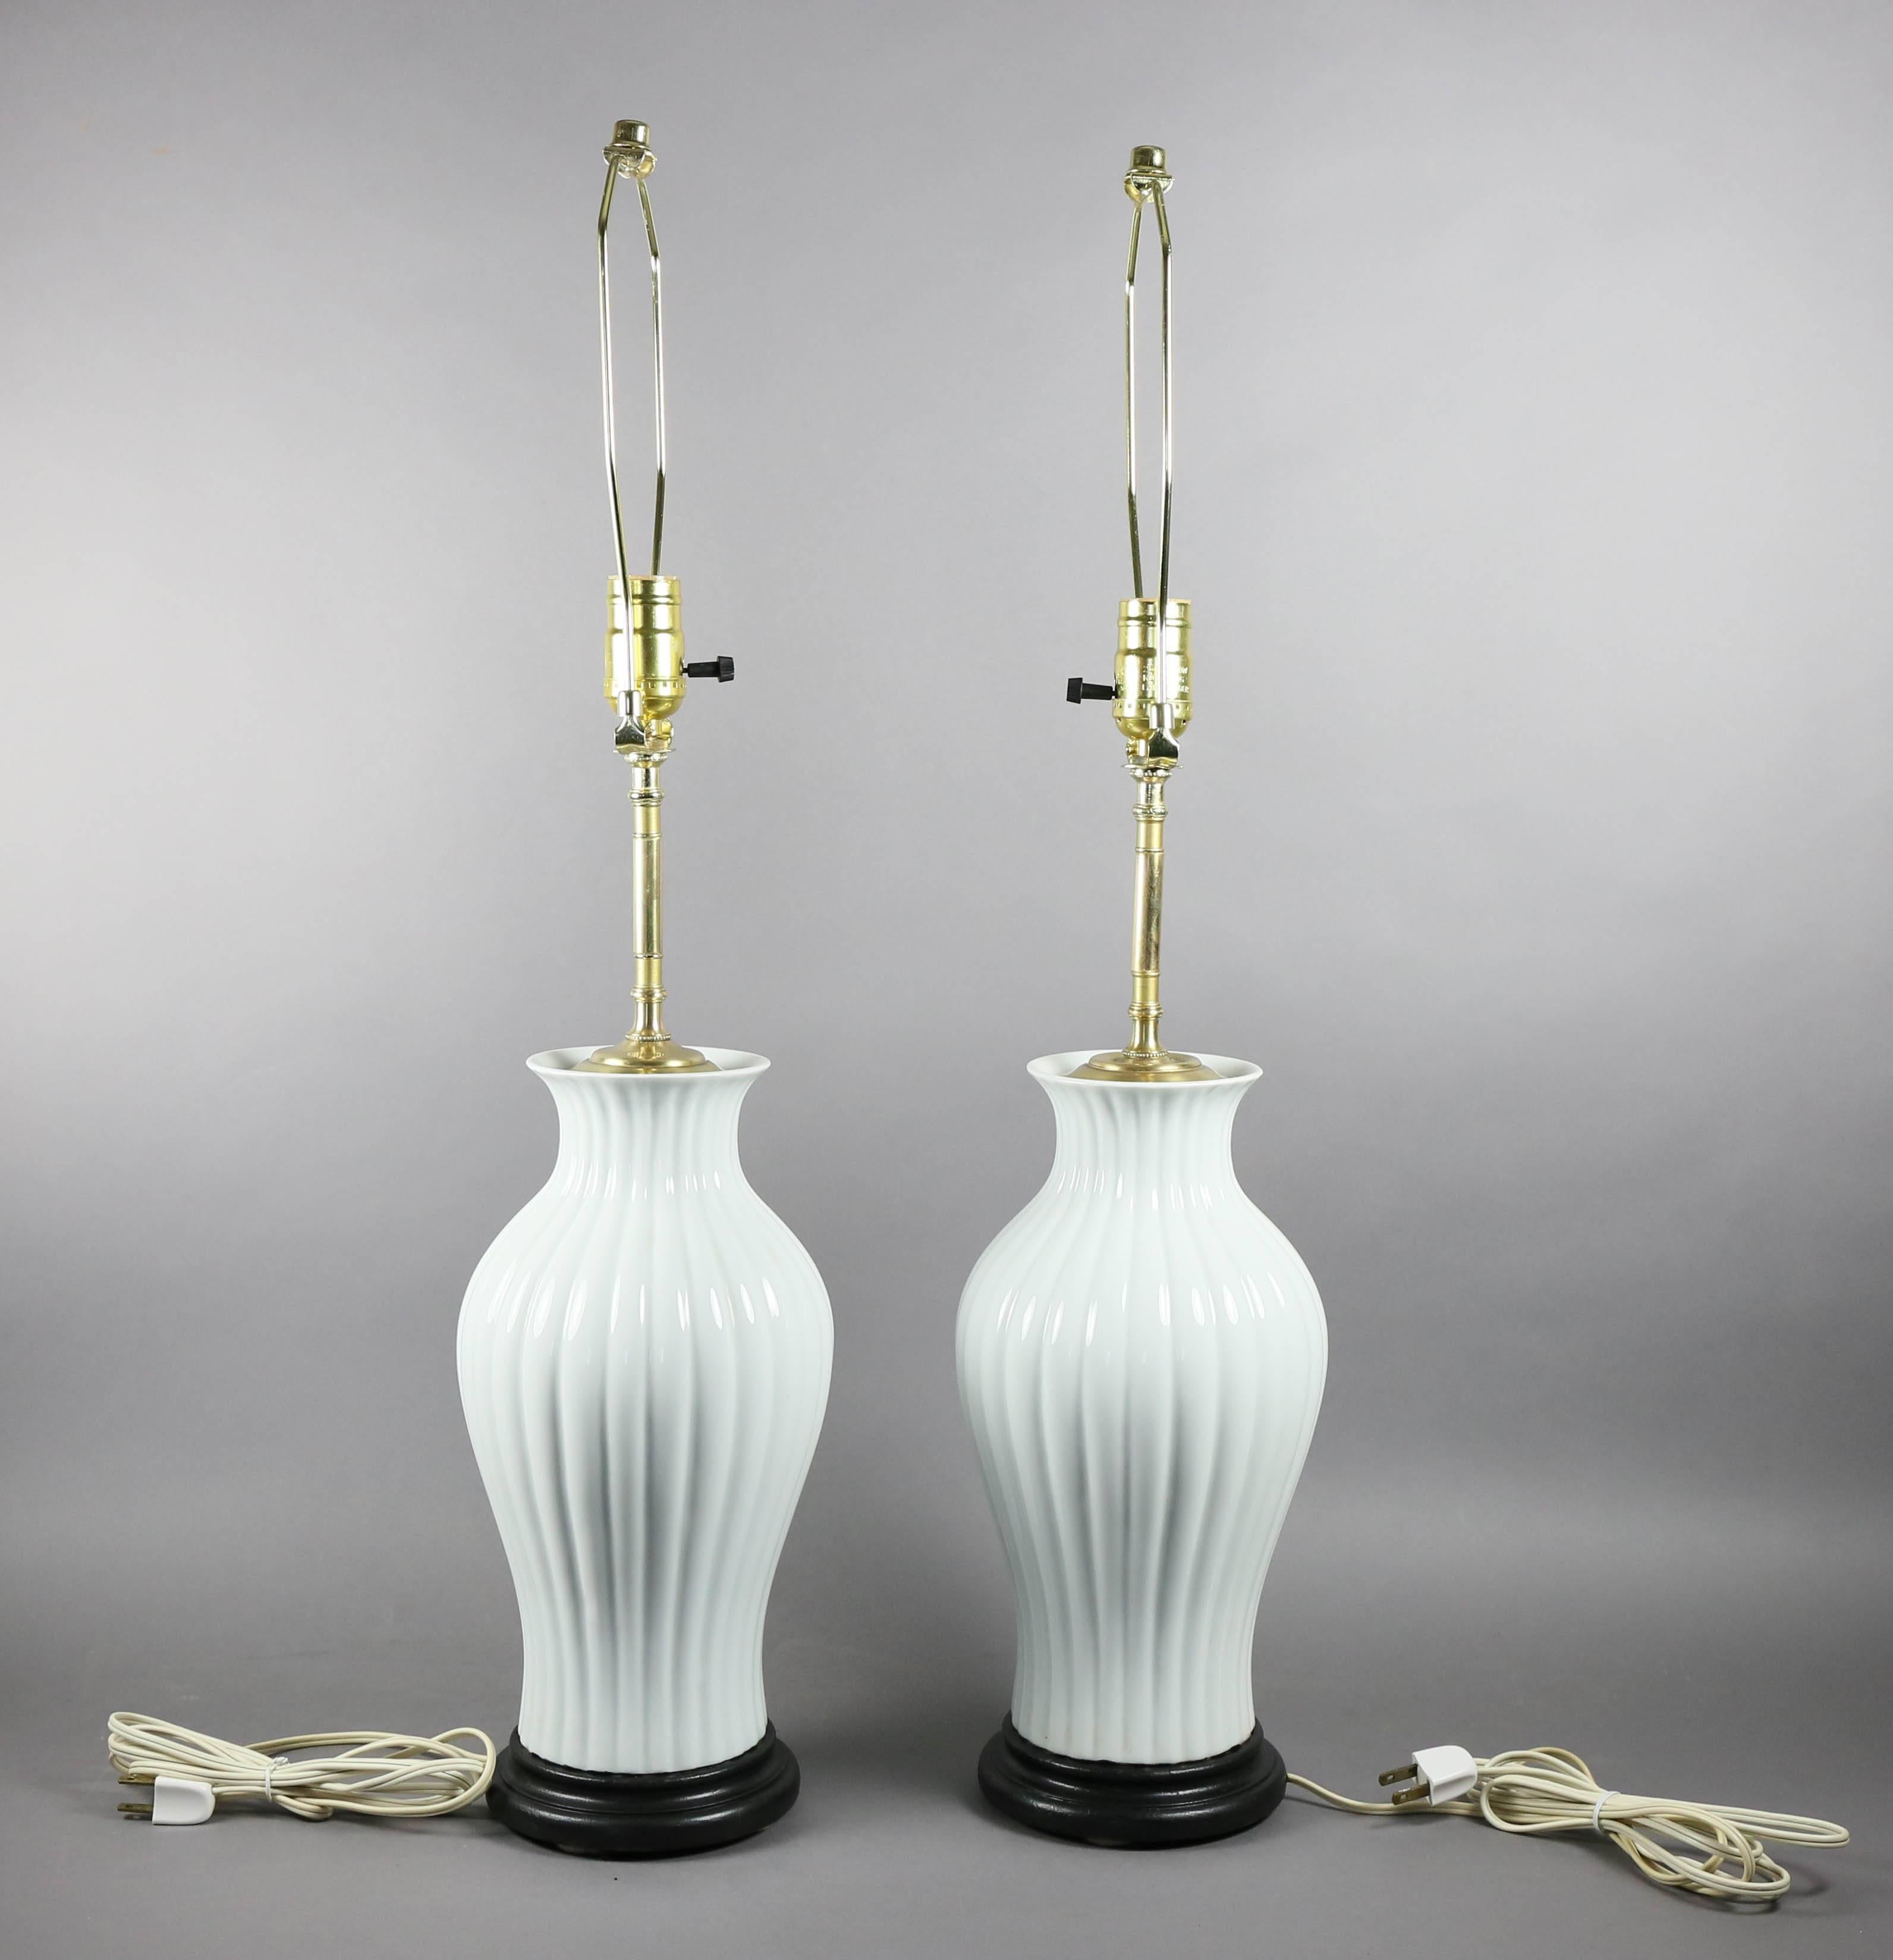 Late 19th Century Pair of Japanese White Porcelain Table Lamps